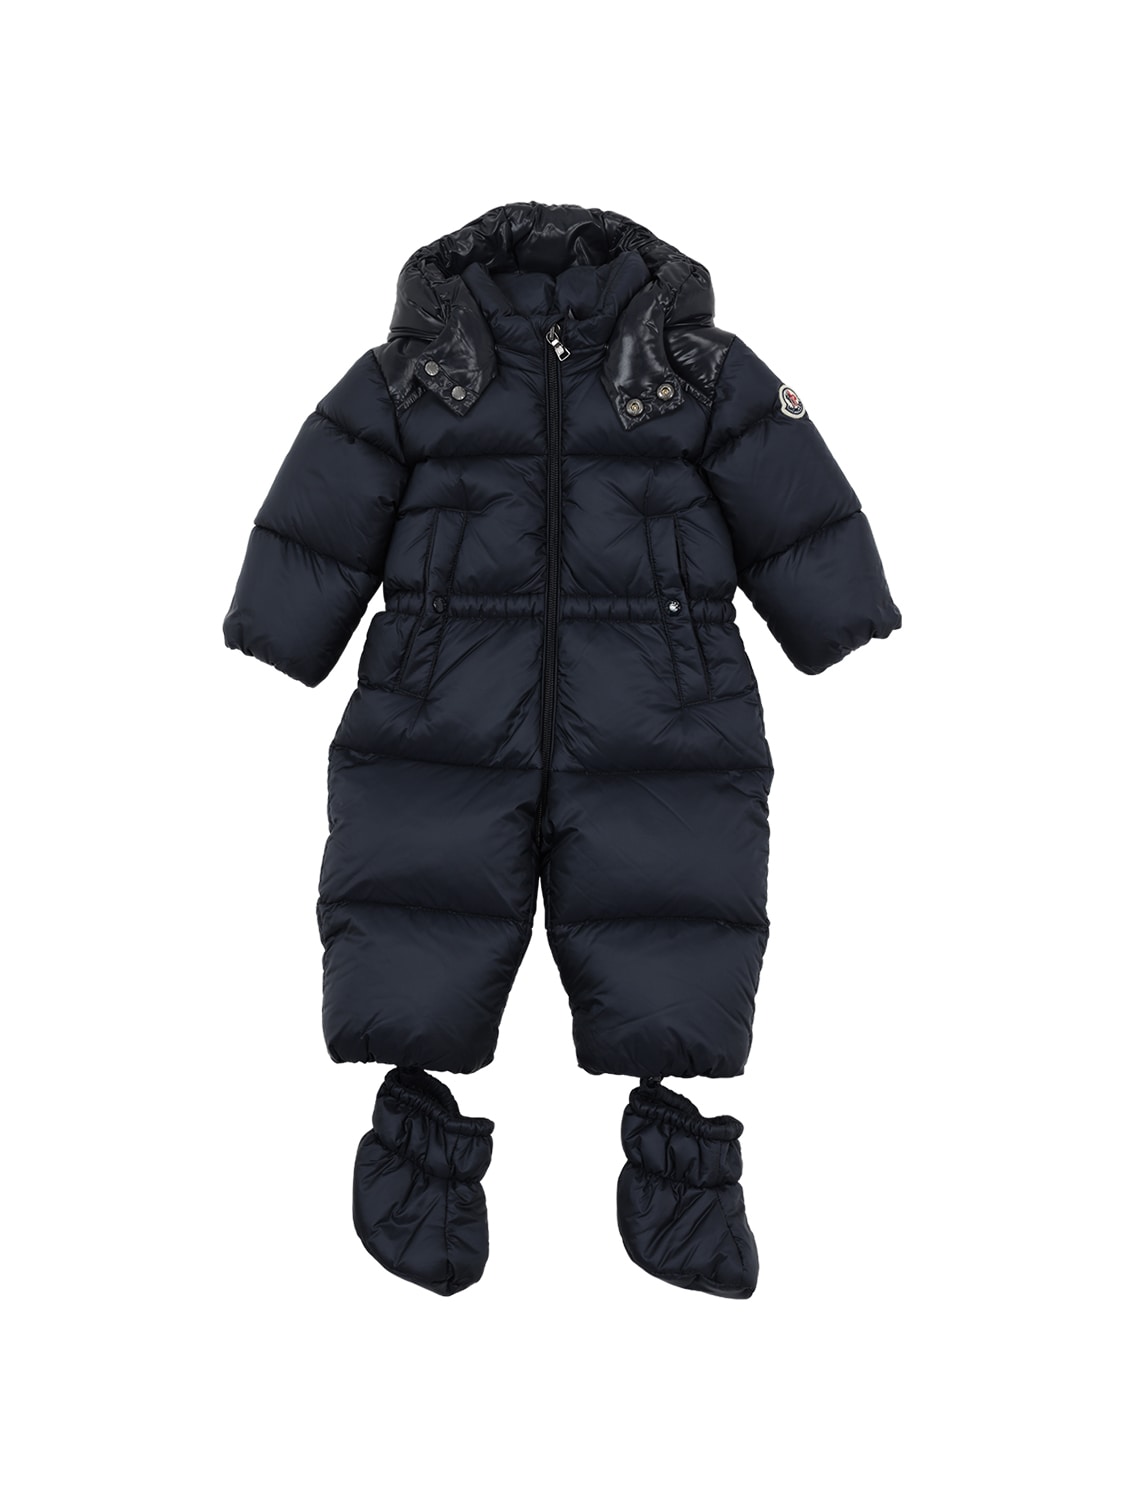 MONCLER “PERVANCE”尼龙羽绒连体裤,70IFGS001-NZC40